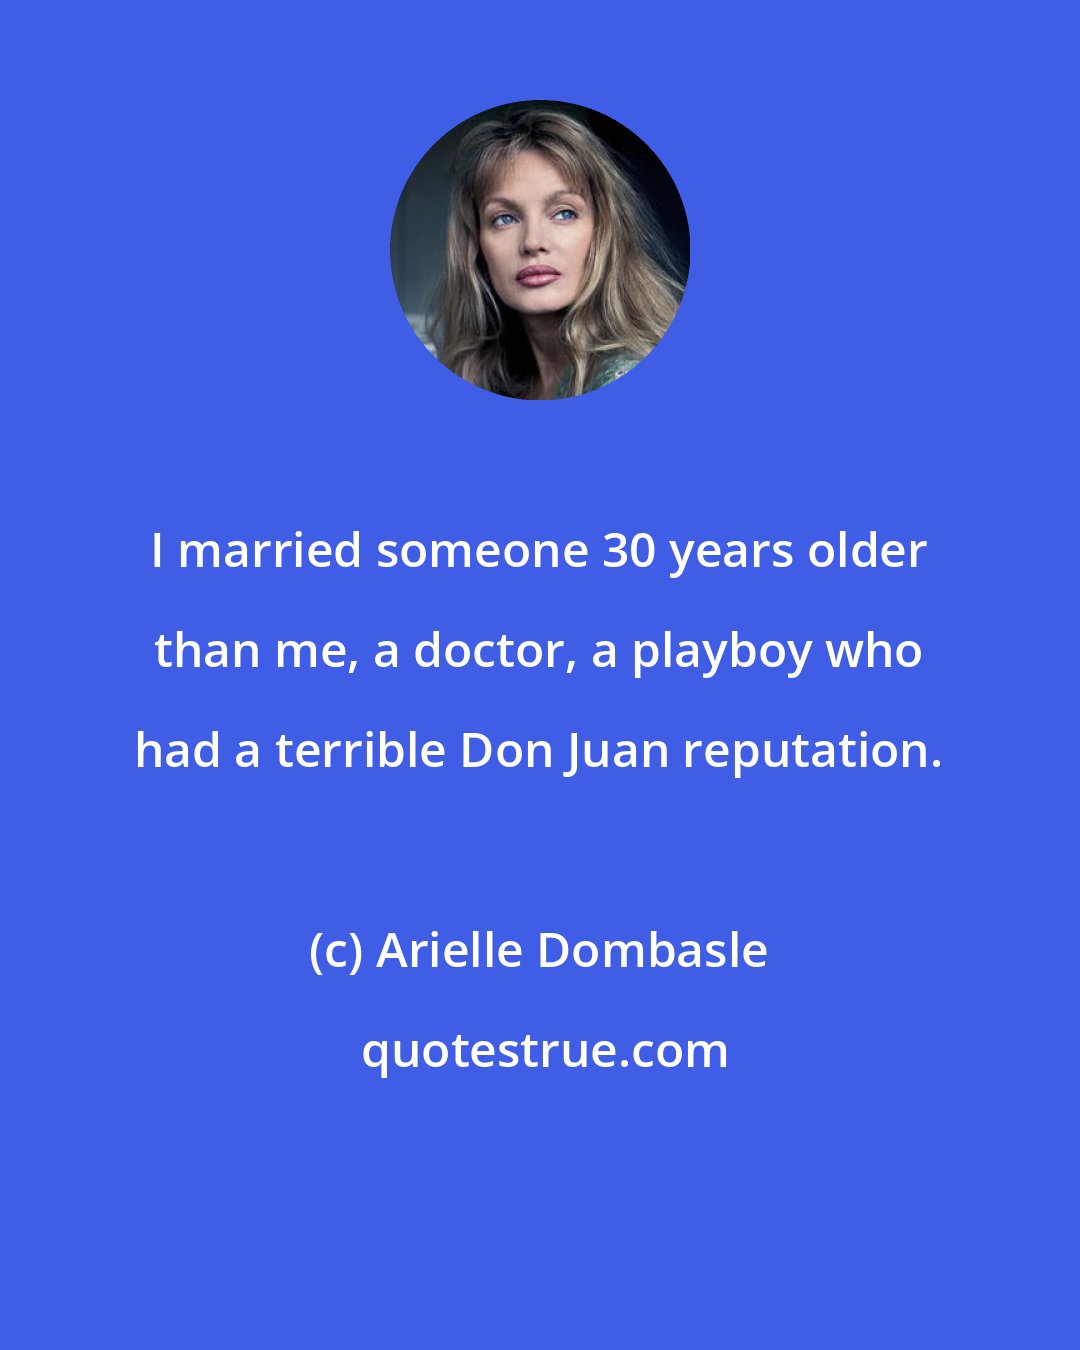 Arielle Dombasle: I married someone 30 years older than me, a doctor, a playboy who had a terrible Don Juan reputation.